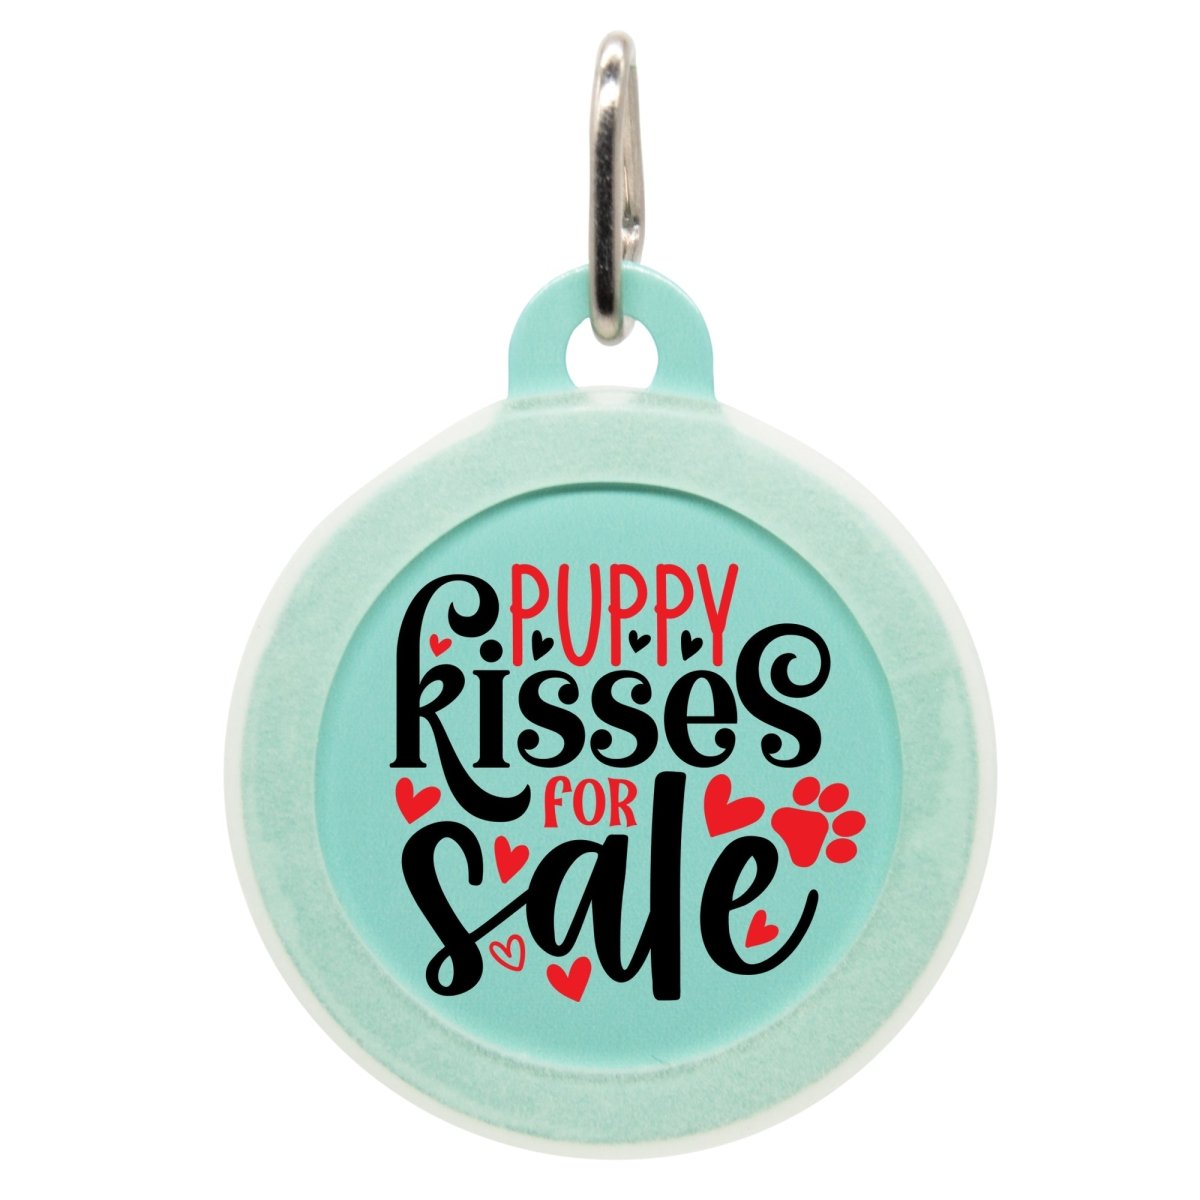 Puppy Kisses For Sale Dog ID Tag - Oh My Paw'd